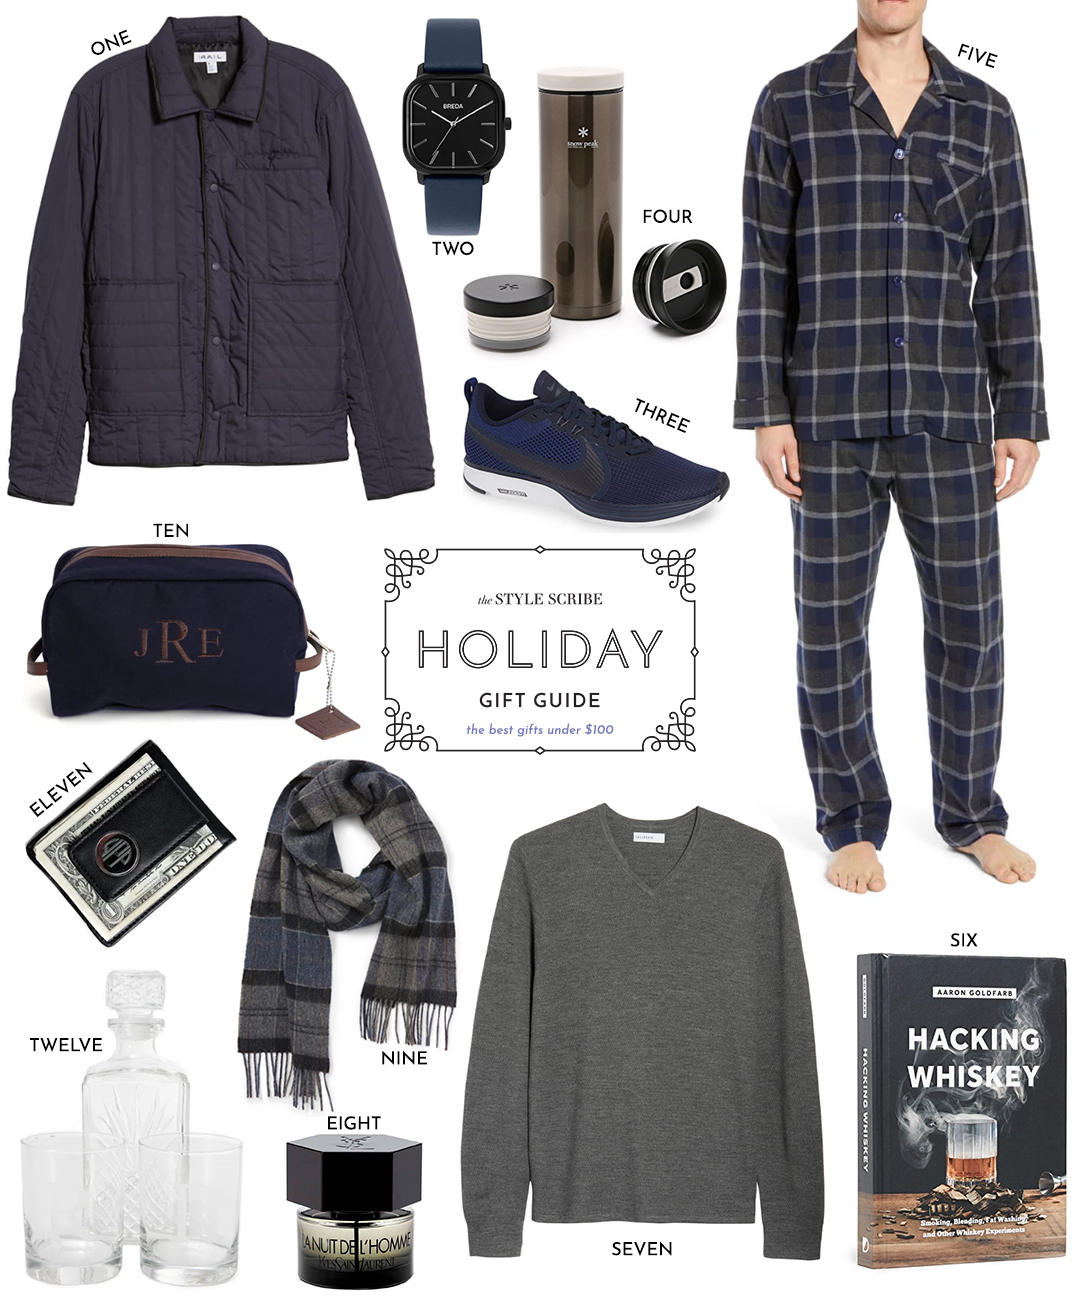 HOLIDAY GIFT GUIDE // FOR HIM UNDER $100